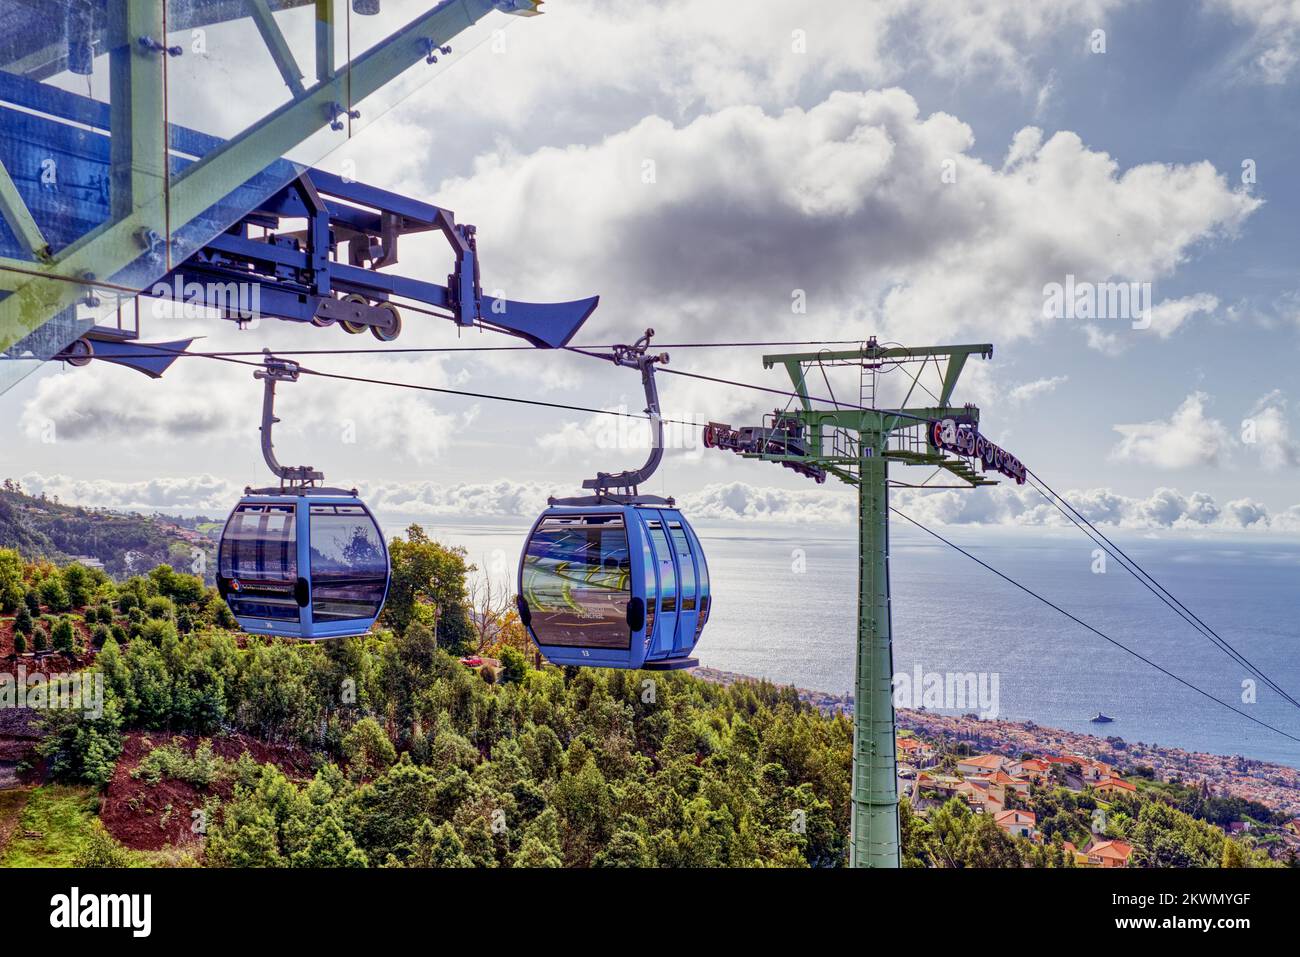 Madeira island, Portugal - Cable cars approaching the cable car station at Monte high above the rooftops and streets of Funchal the capital city. Stock Photo